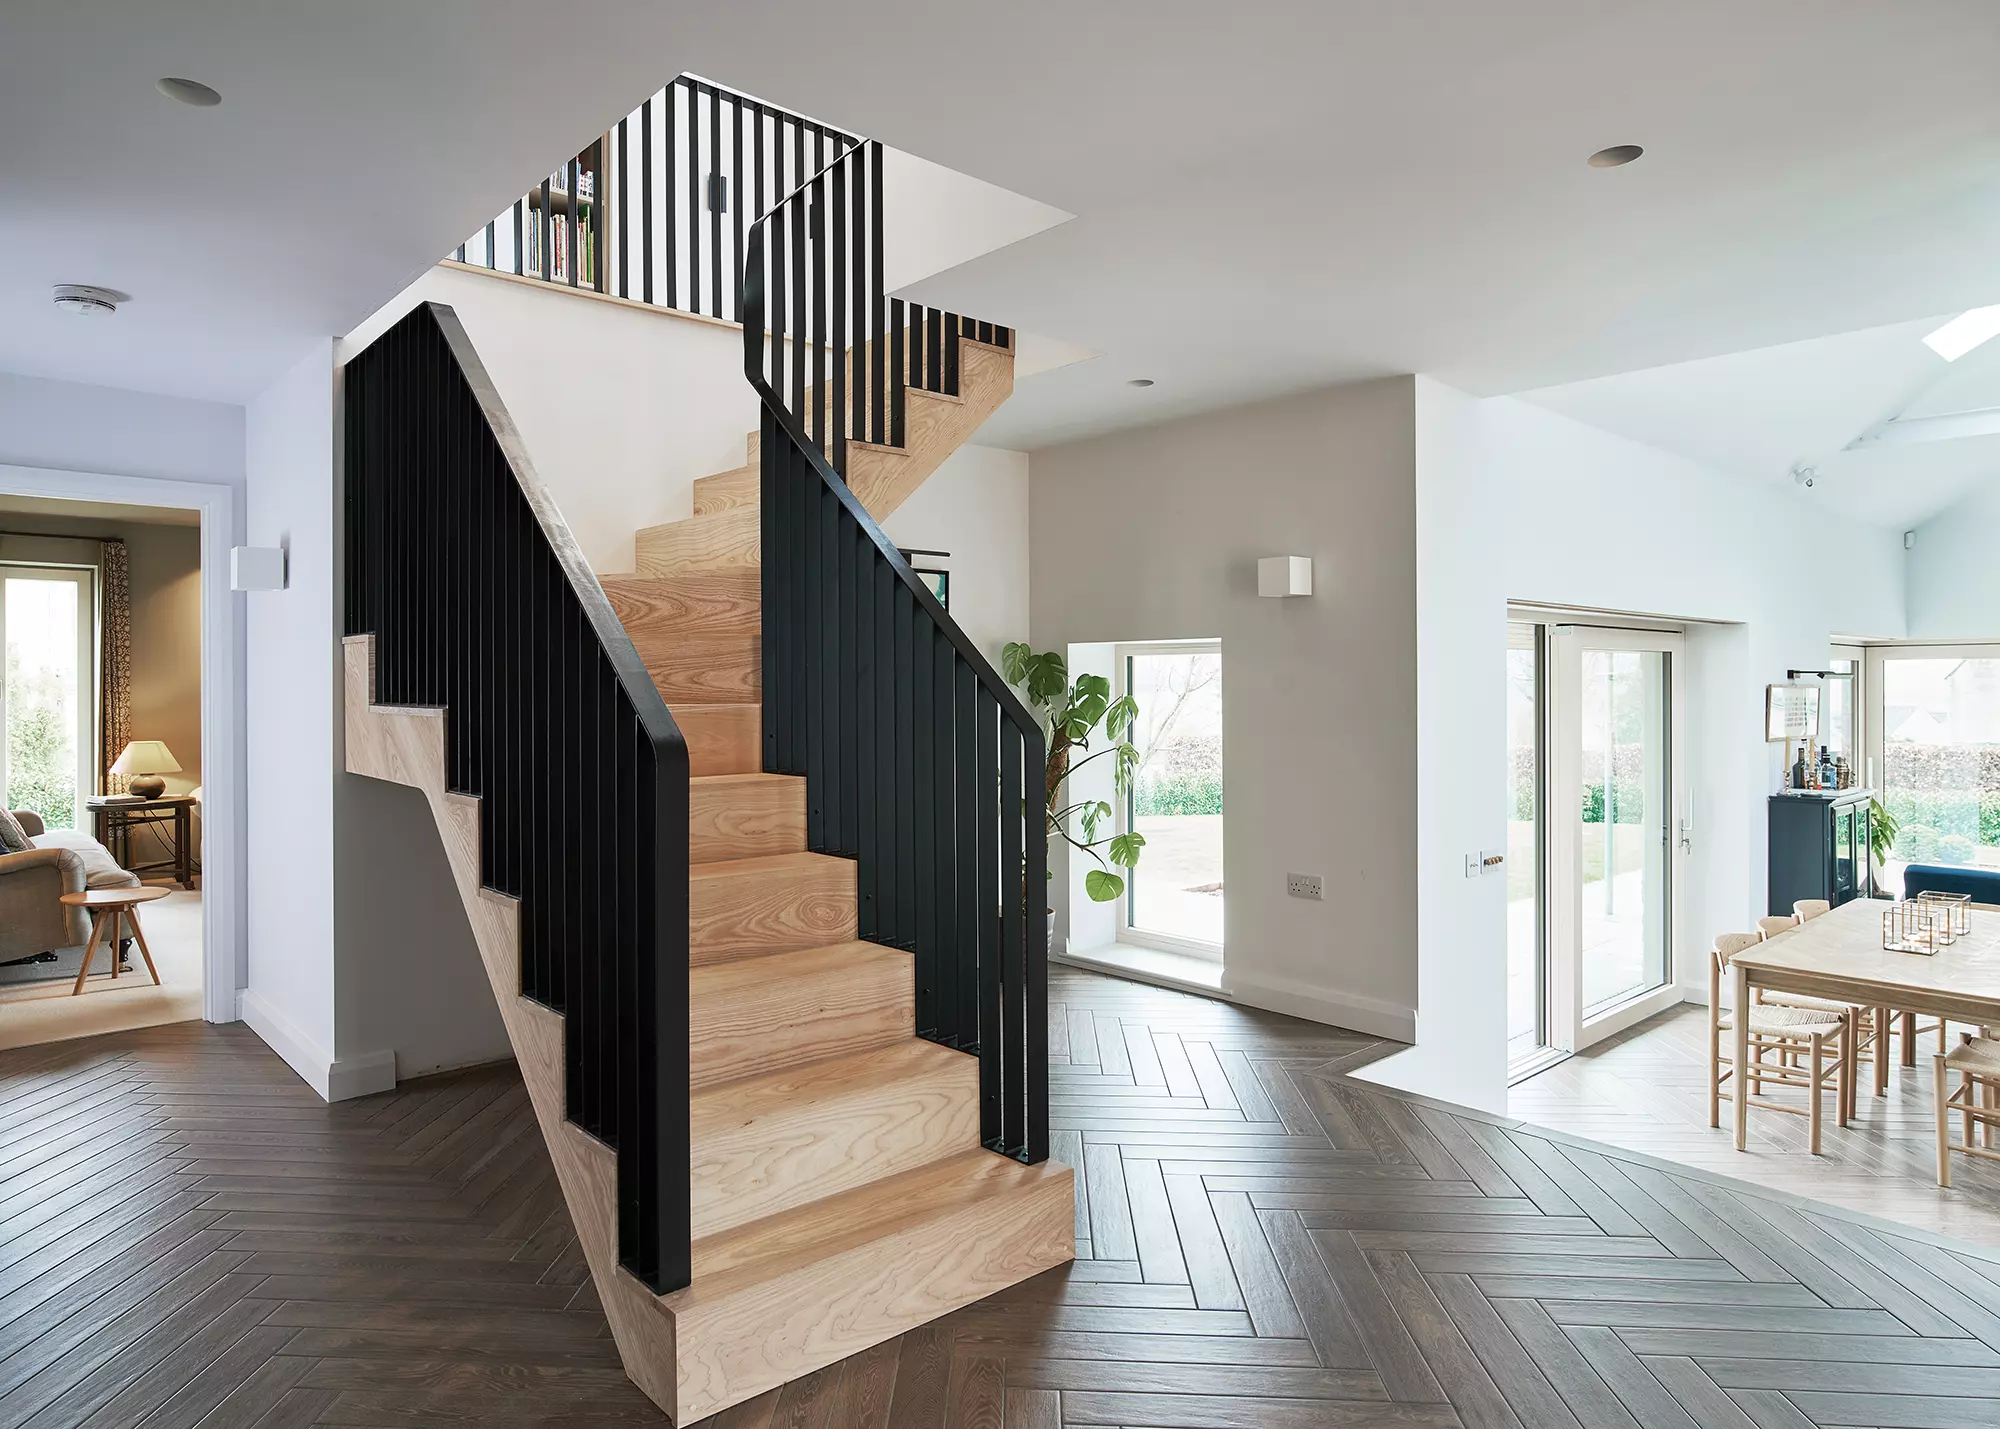 6 Staircase Ideas on a Budget